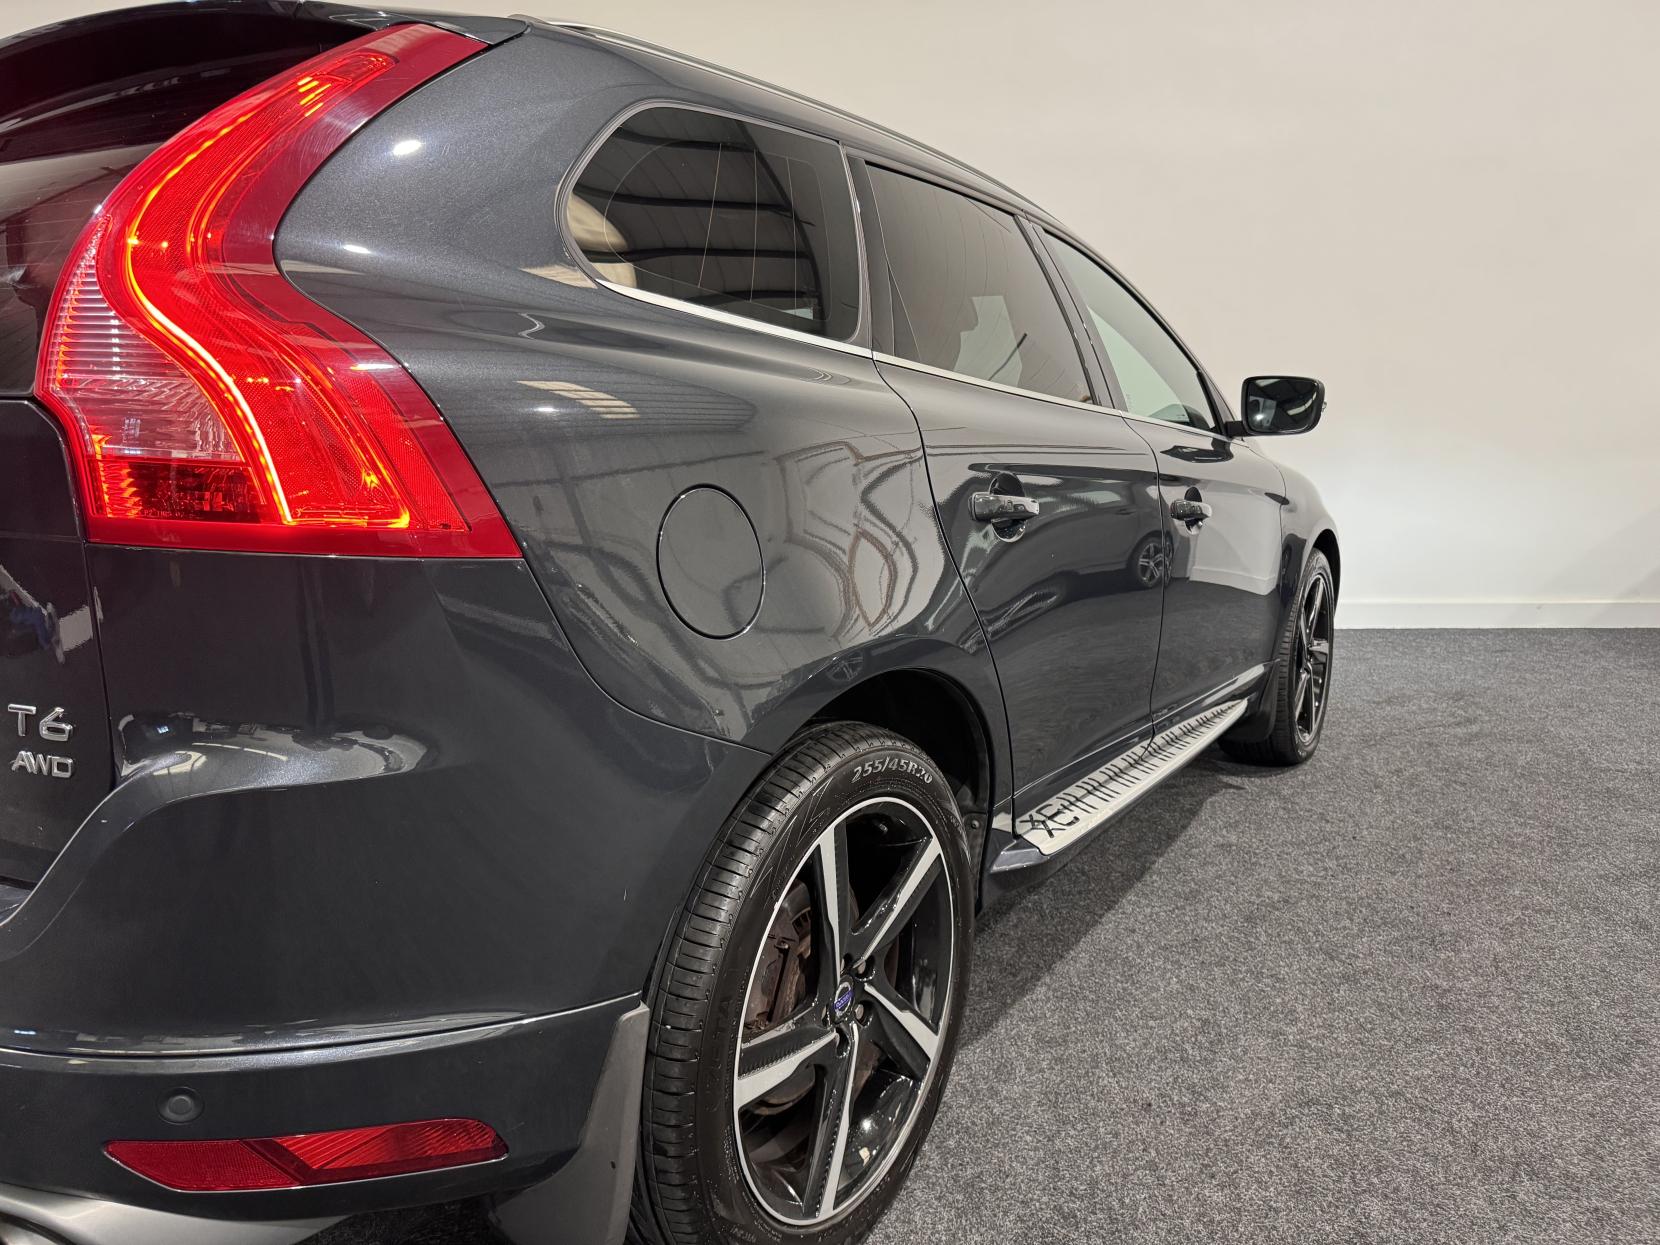 Volvo XC60 3.0 T6 R-Design Lux Nav SUV 5dr Petrol Geartronic AWD Euro 5 (304 ps)